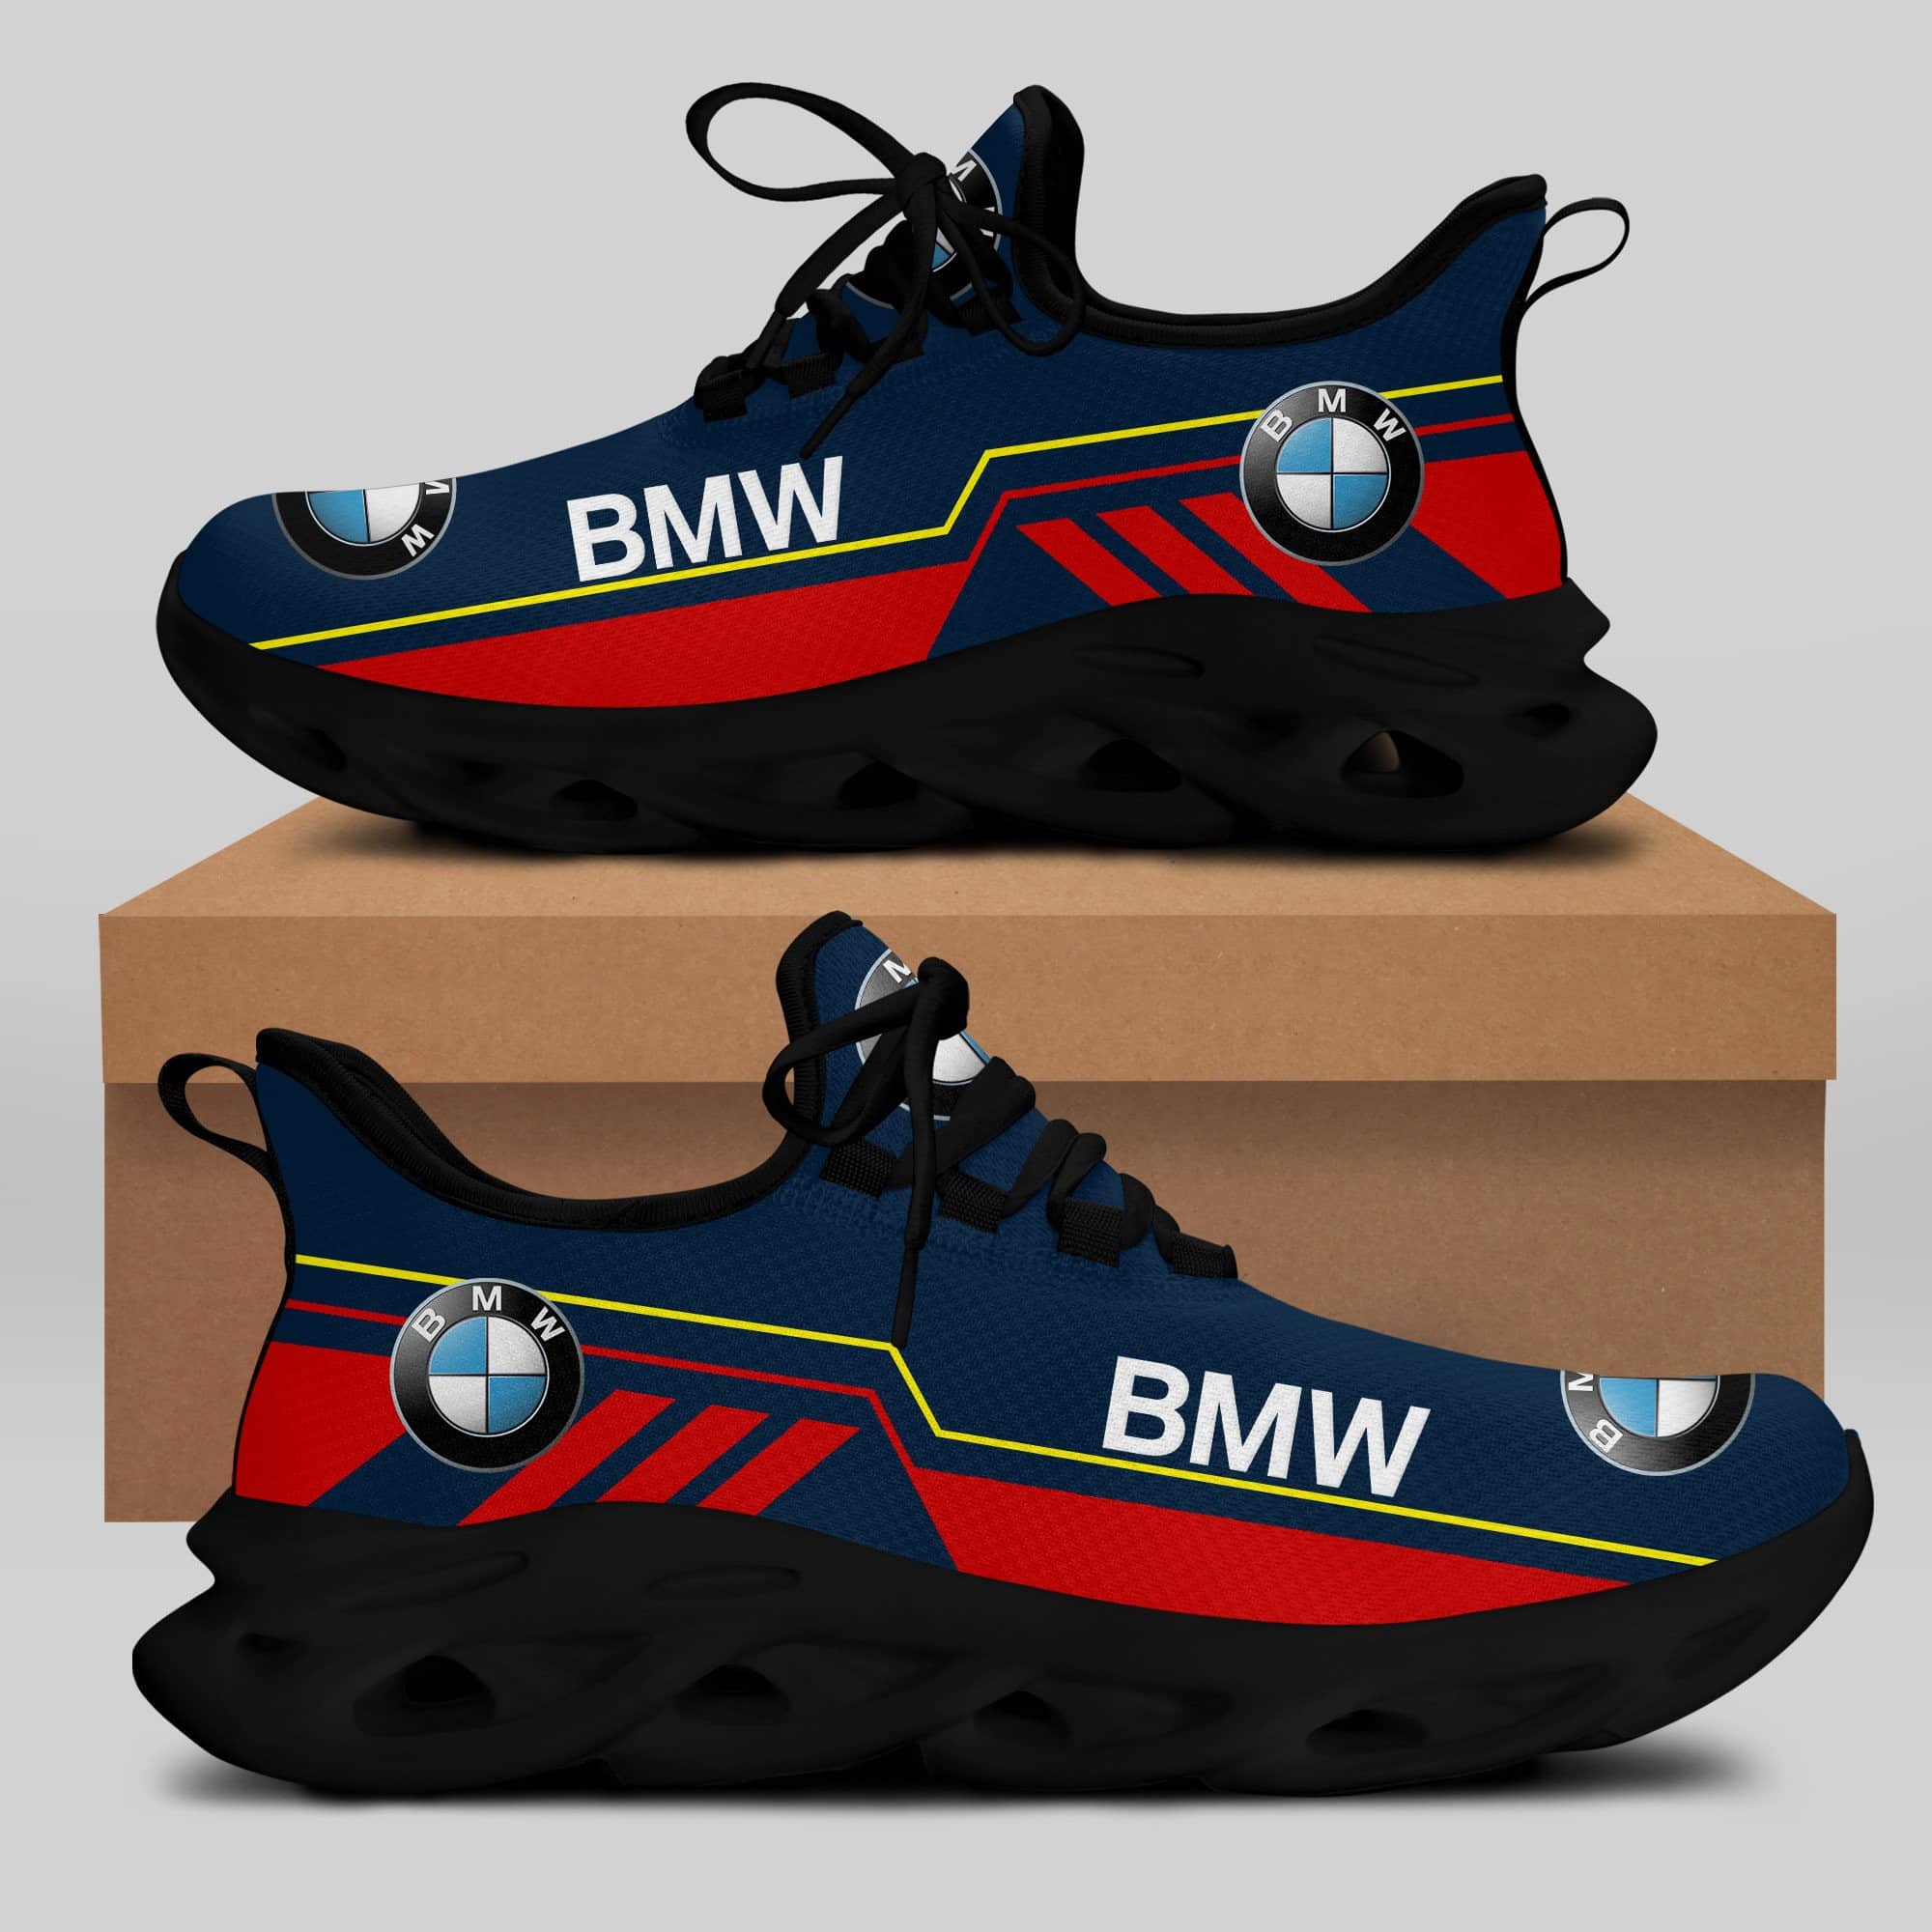 Bmw Running Shoes Max Soul Shoes Sneakers Ver 39 1